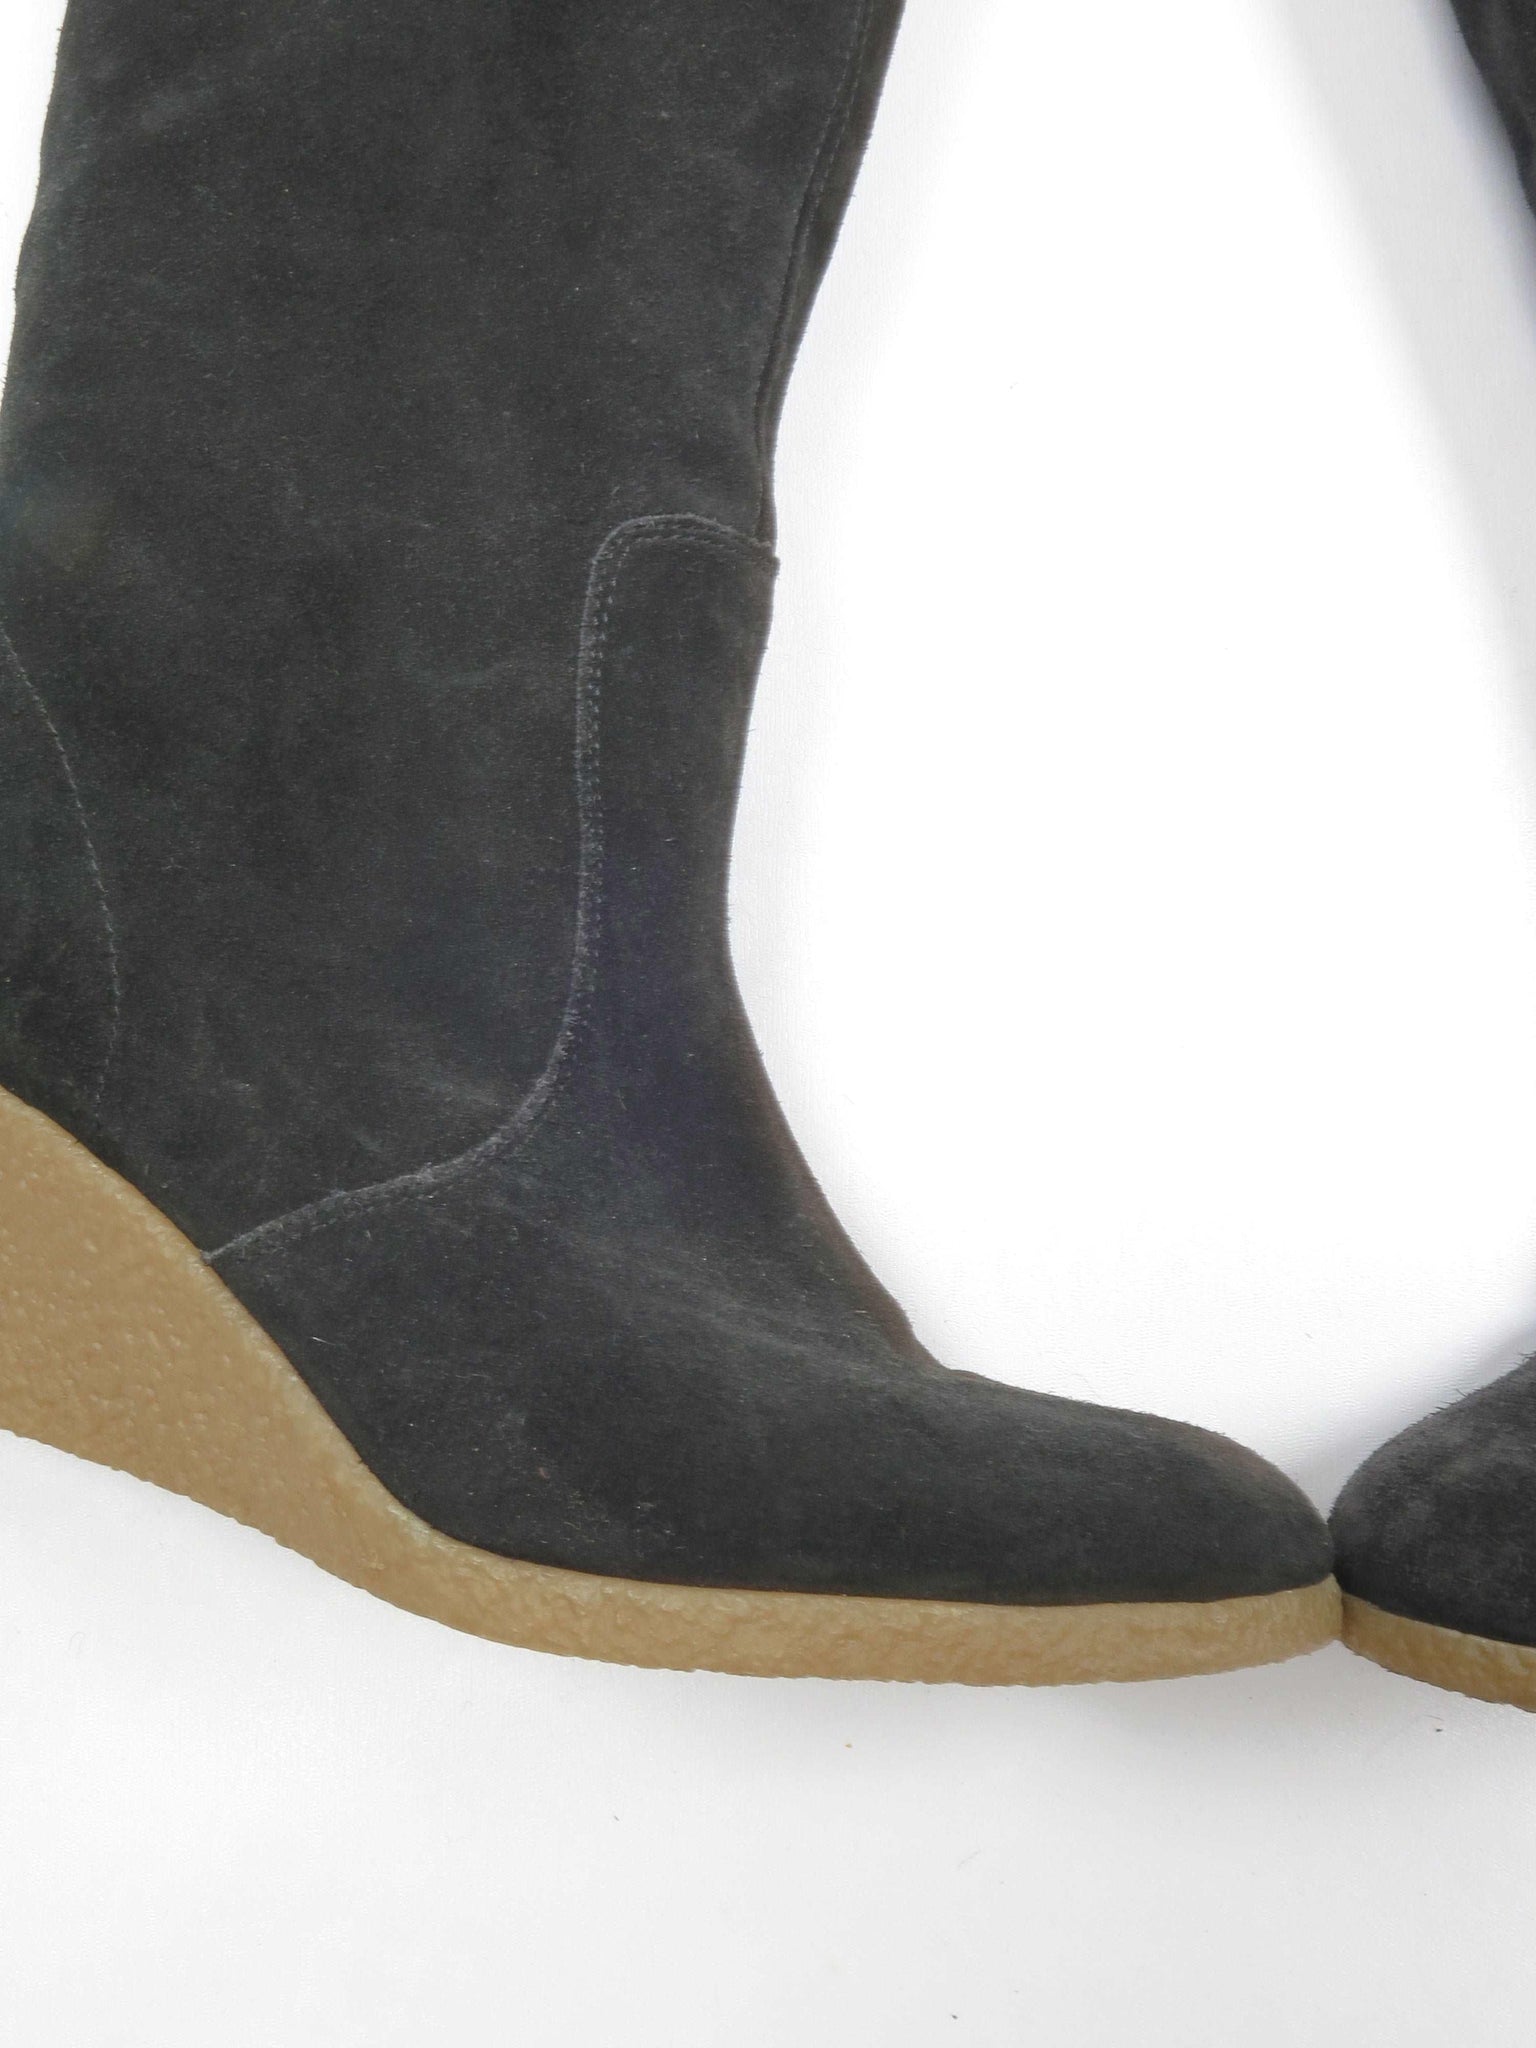 Inky Black LK Bennett Suede Wedge Sole Boots 40/7 - The Harlequin